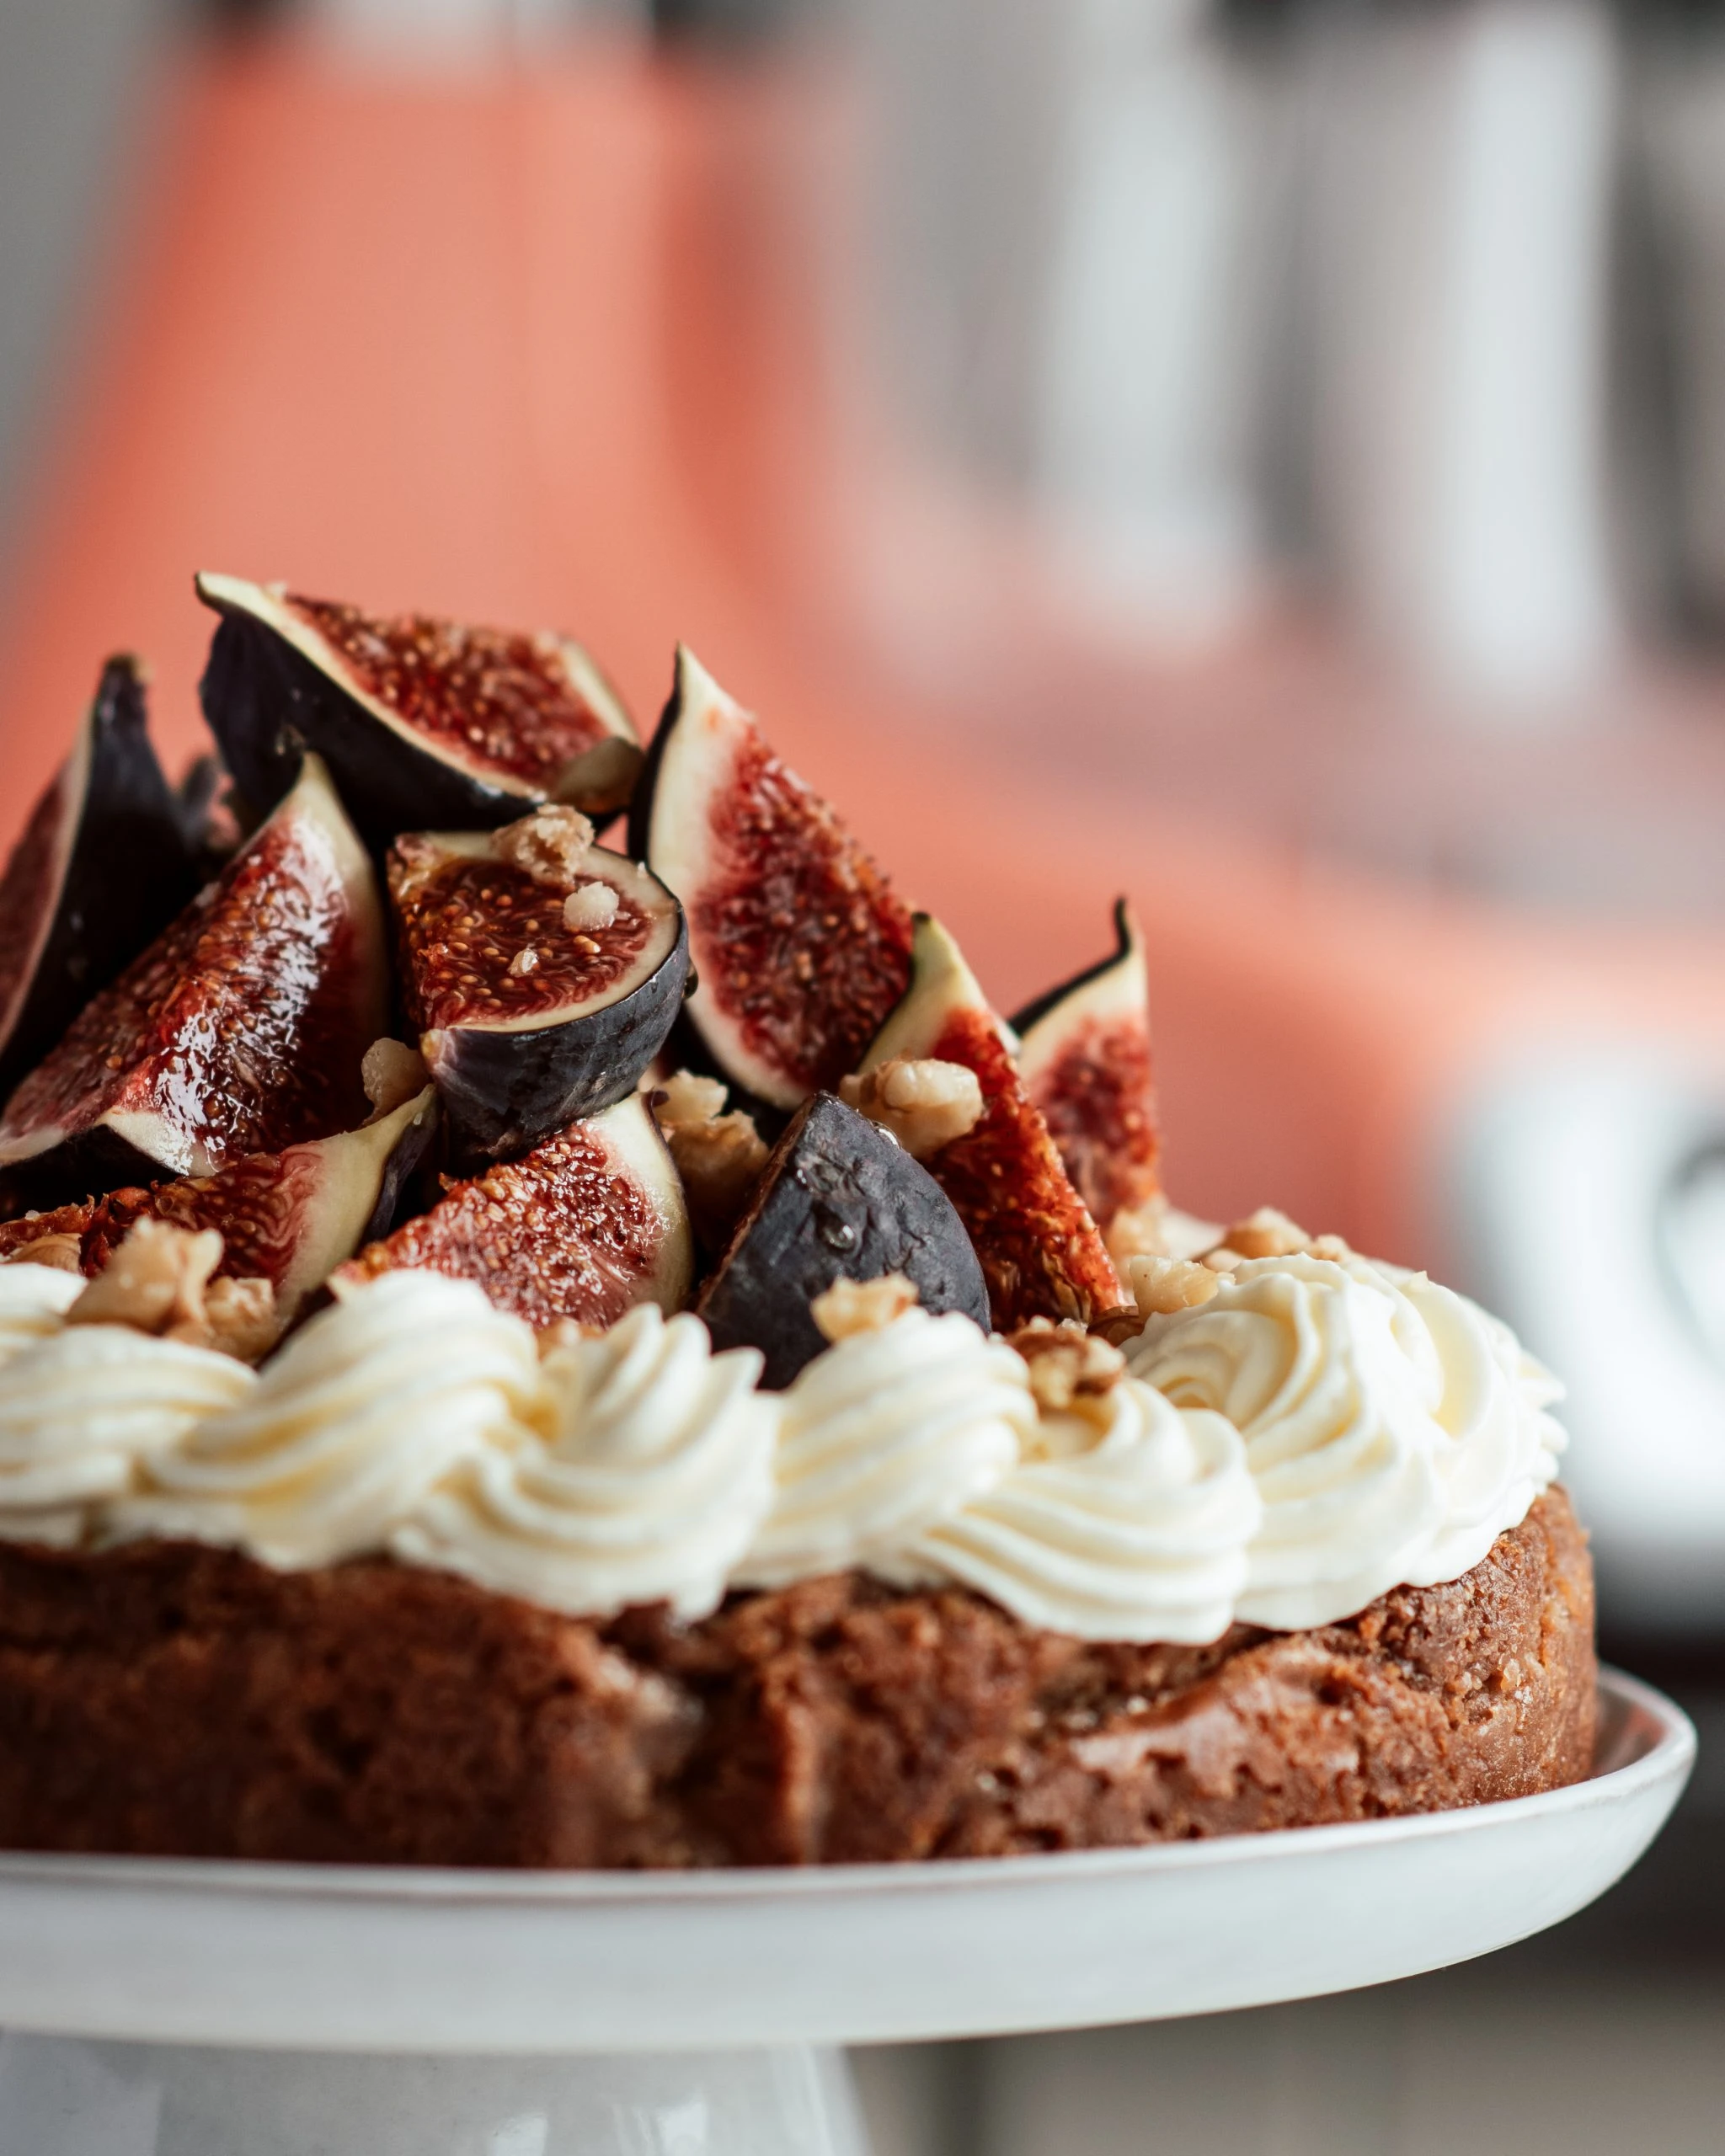 a picture of a Walnut cake with figs